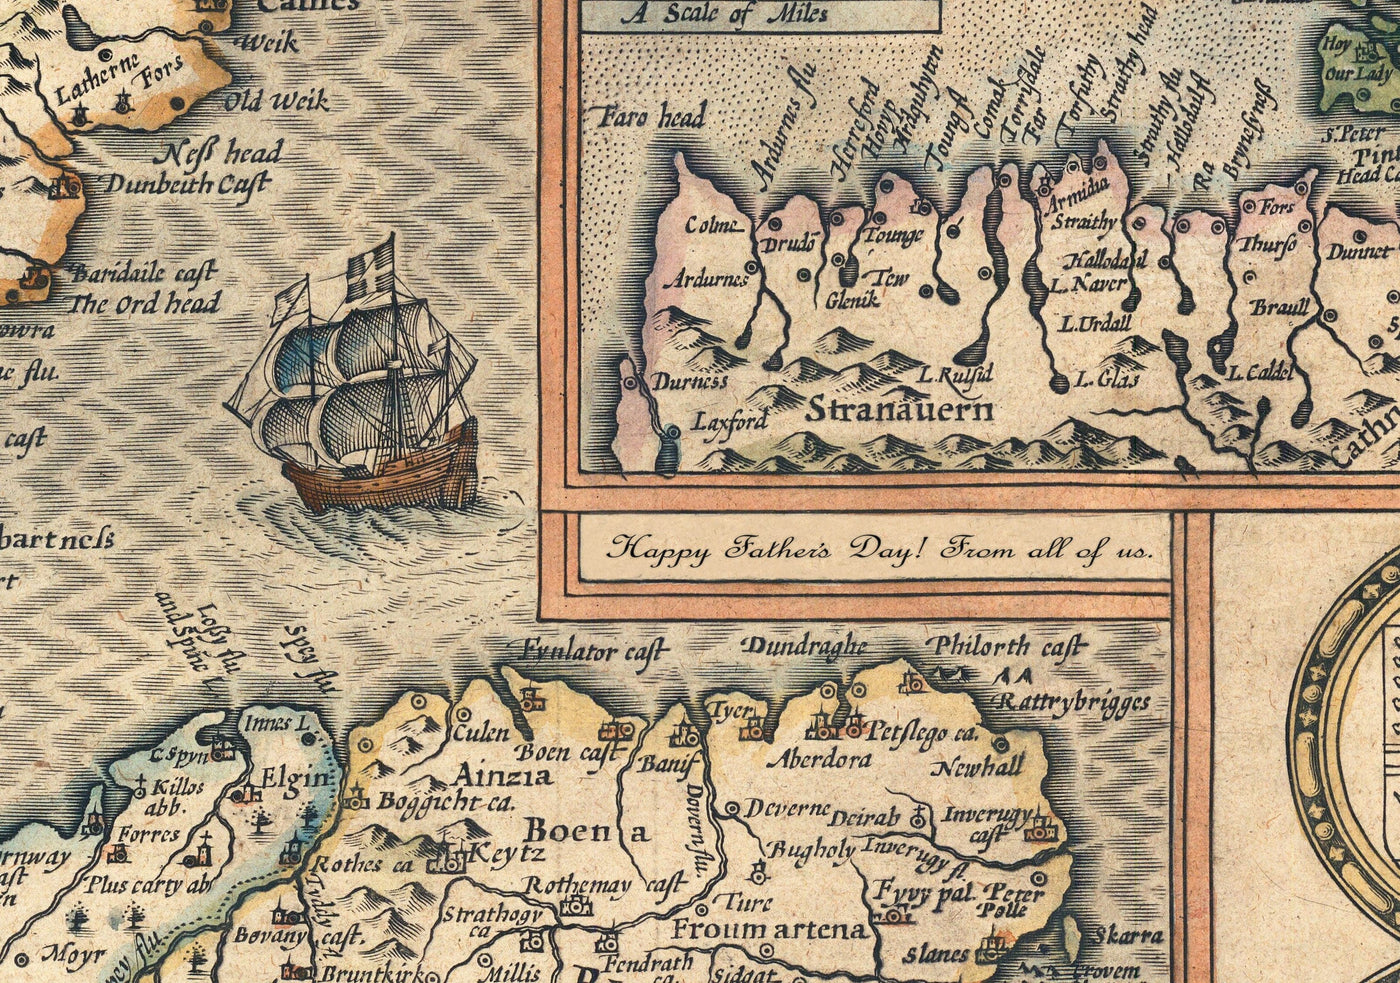 Old Map of Sussex in 1611 by John Speed - Worthing, Crawley, Brighton, Bognor, Eastbourne